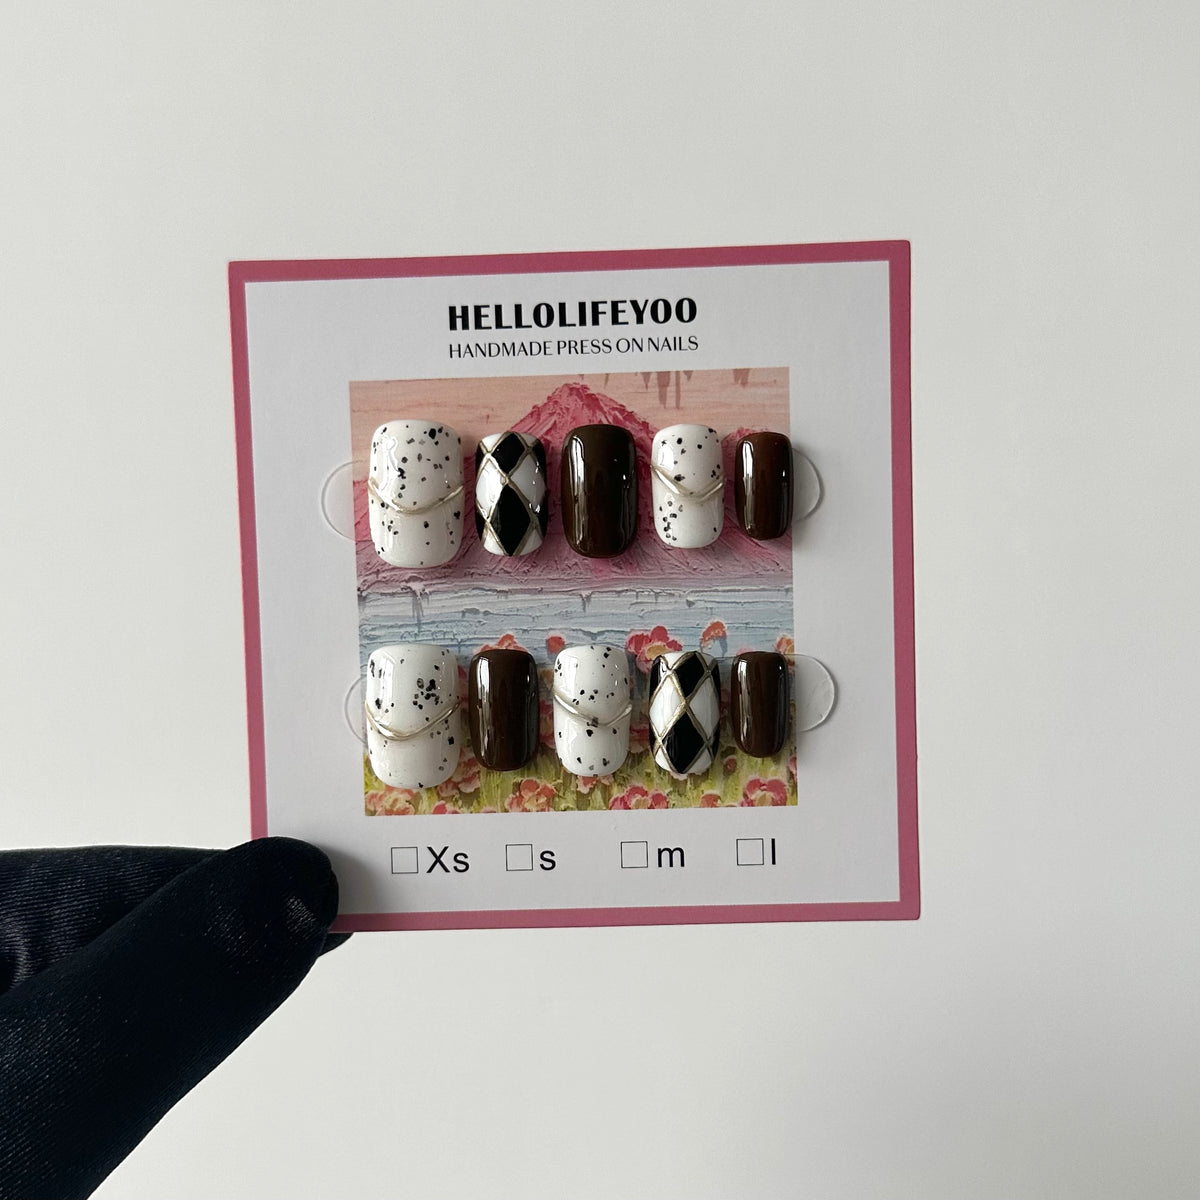 AUTUMN-TEN PIECES OF HANDCRAFTED PRESS ON NAIL